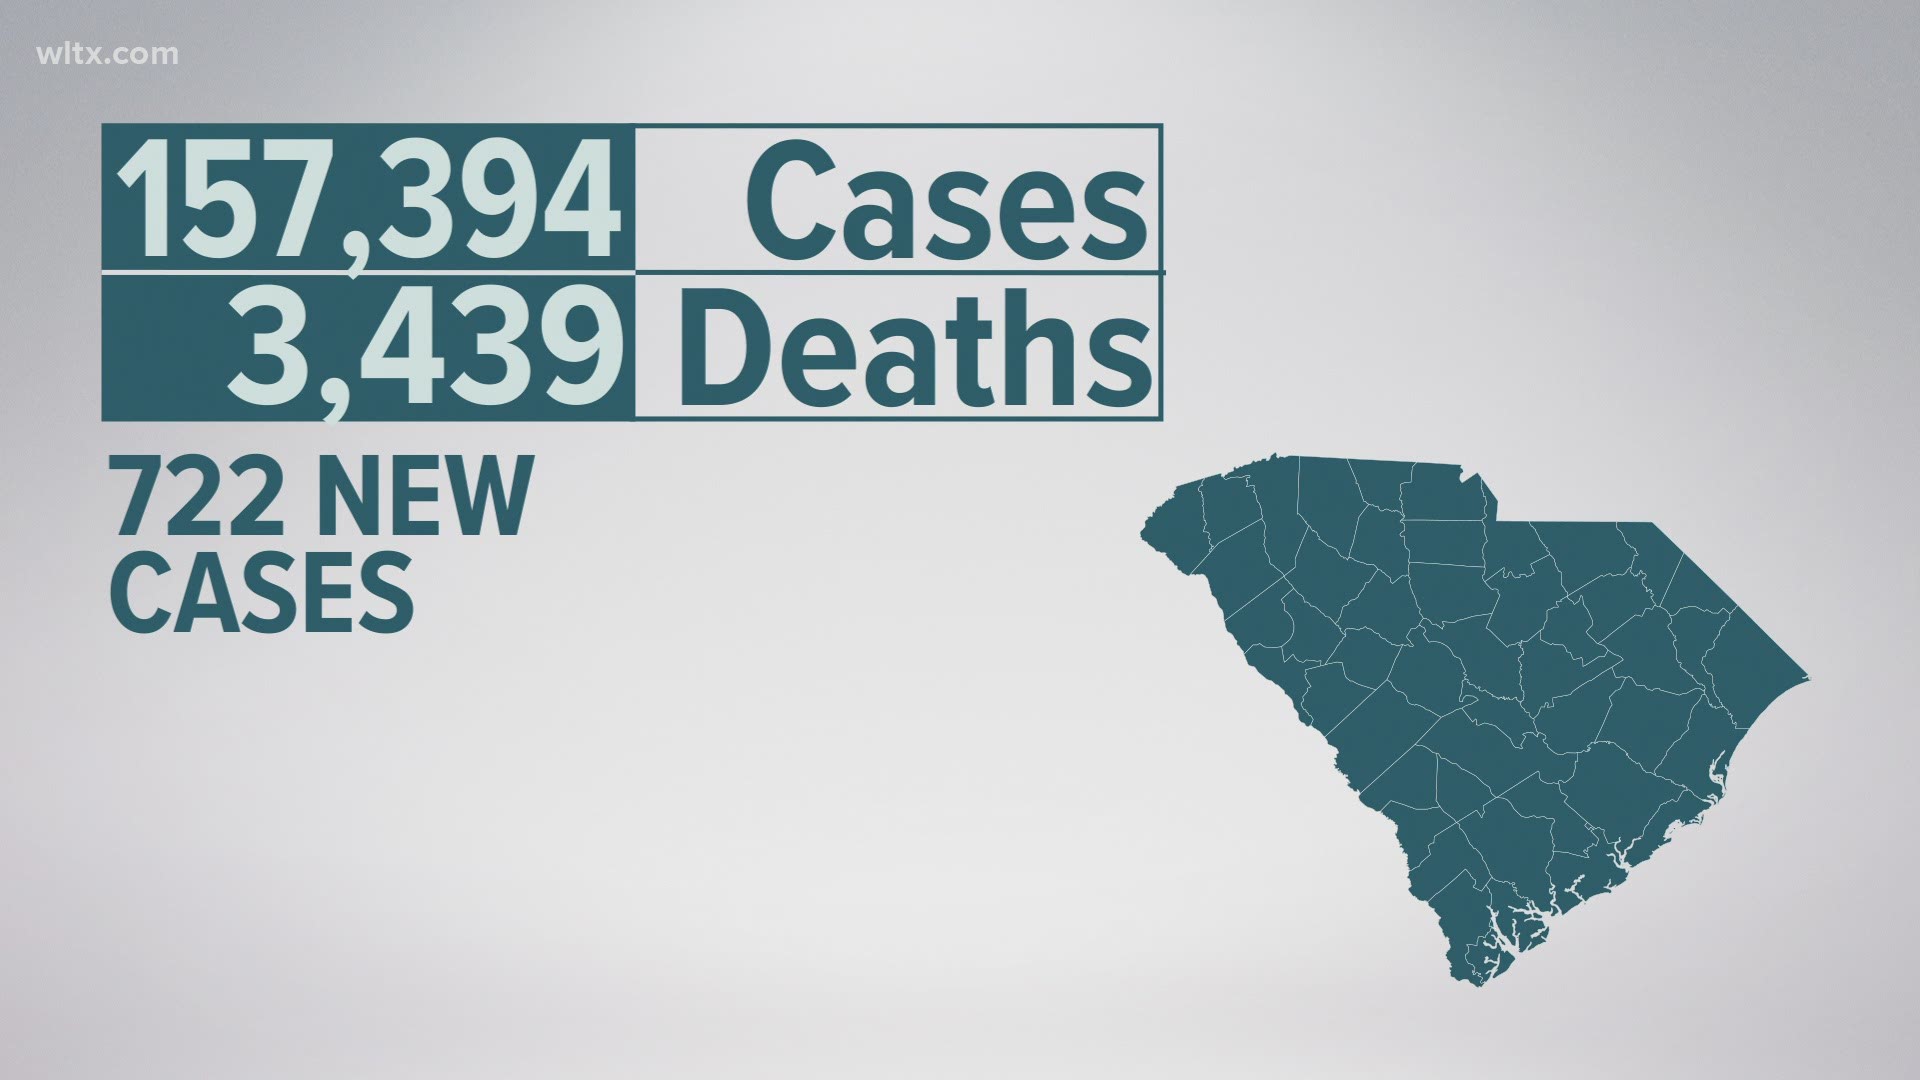 This brings the total number of confirmed cases to 157,394, probable cases to 6,596, confirmed deaths to 3,439, and 211 probable deaths.